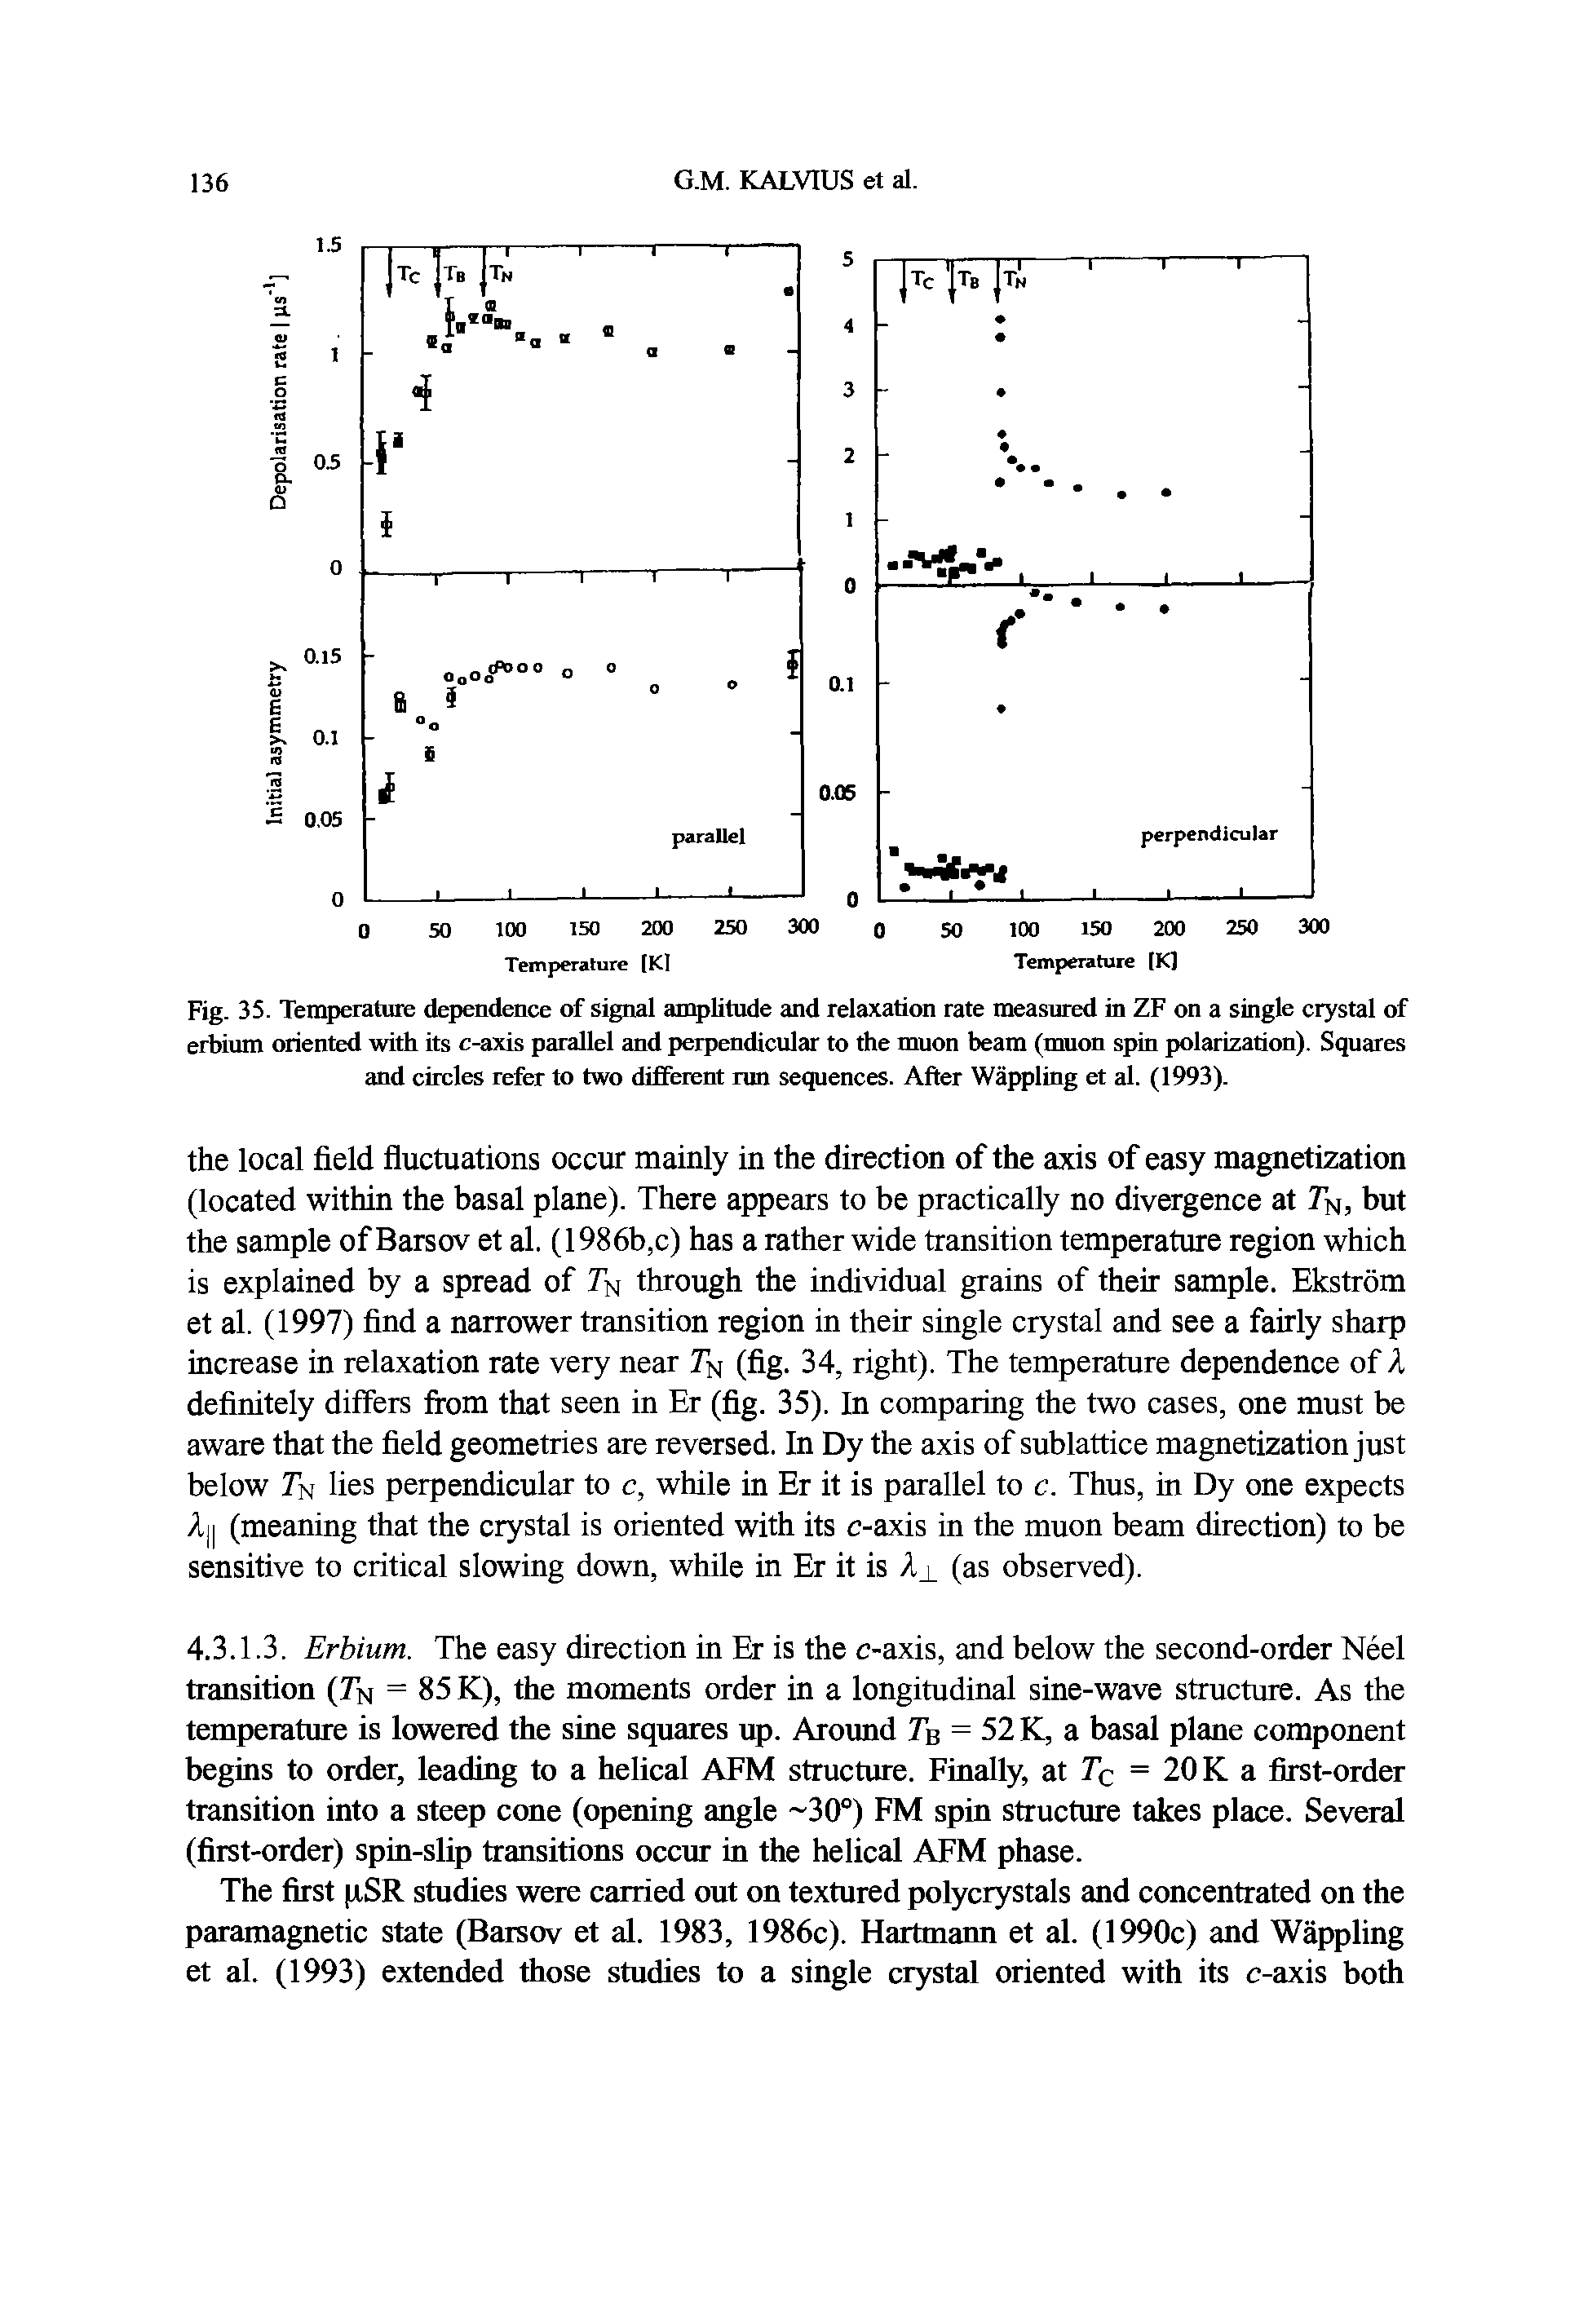 Fig. 35. Temperature dependence of signal amplitude and relaxation rate measured in ZF on a single crystal of erbium oriented with its c-axis parallel and perpendicular to the muon beam (muon spin polarization). Squares and circles refer to two different run sequences. After Wappling et al. (1993).